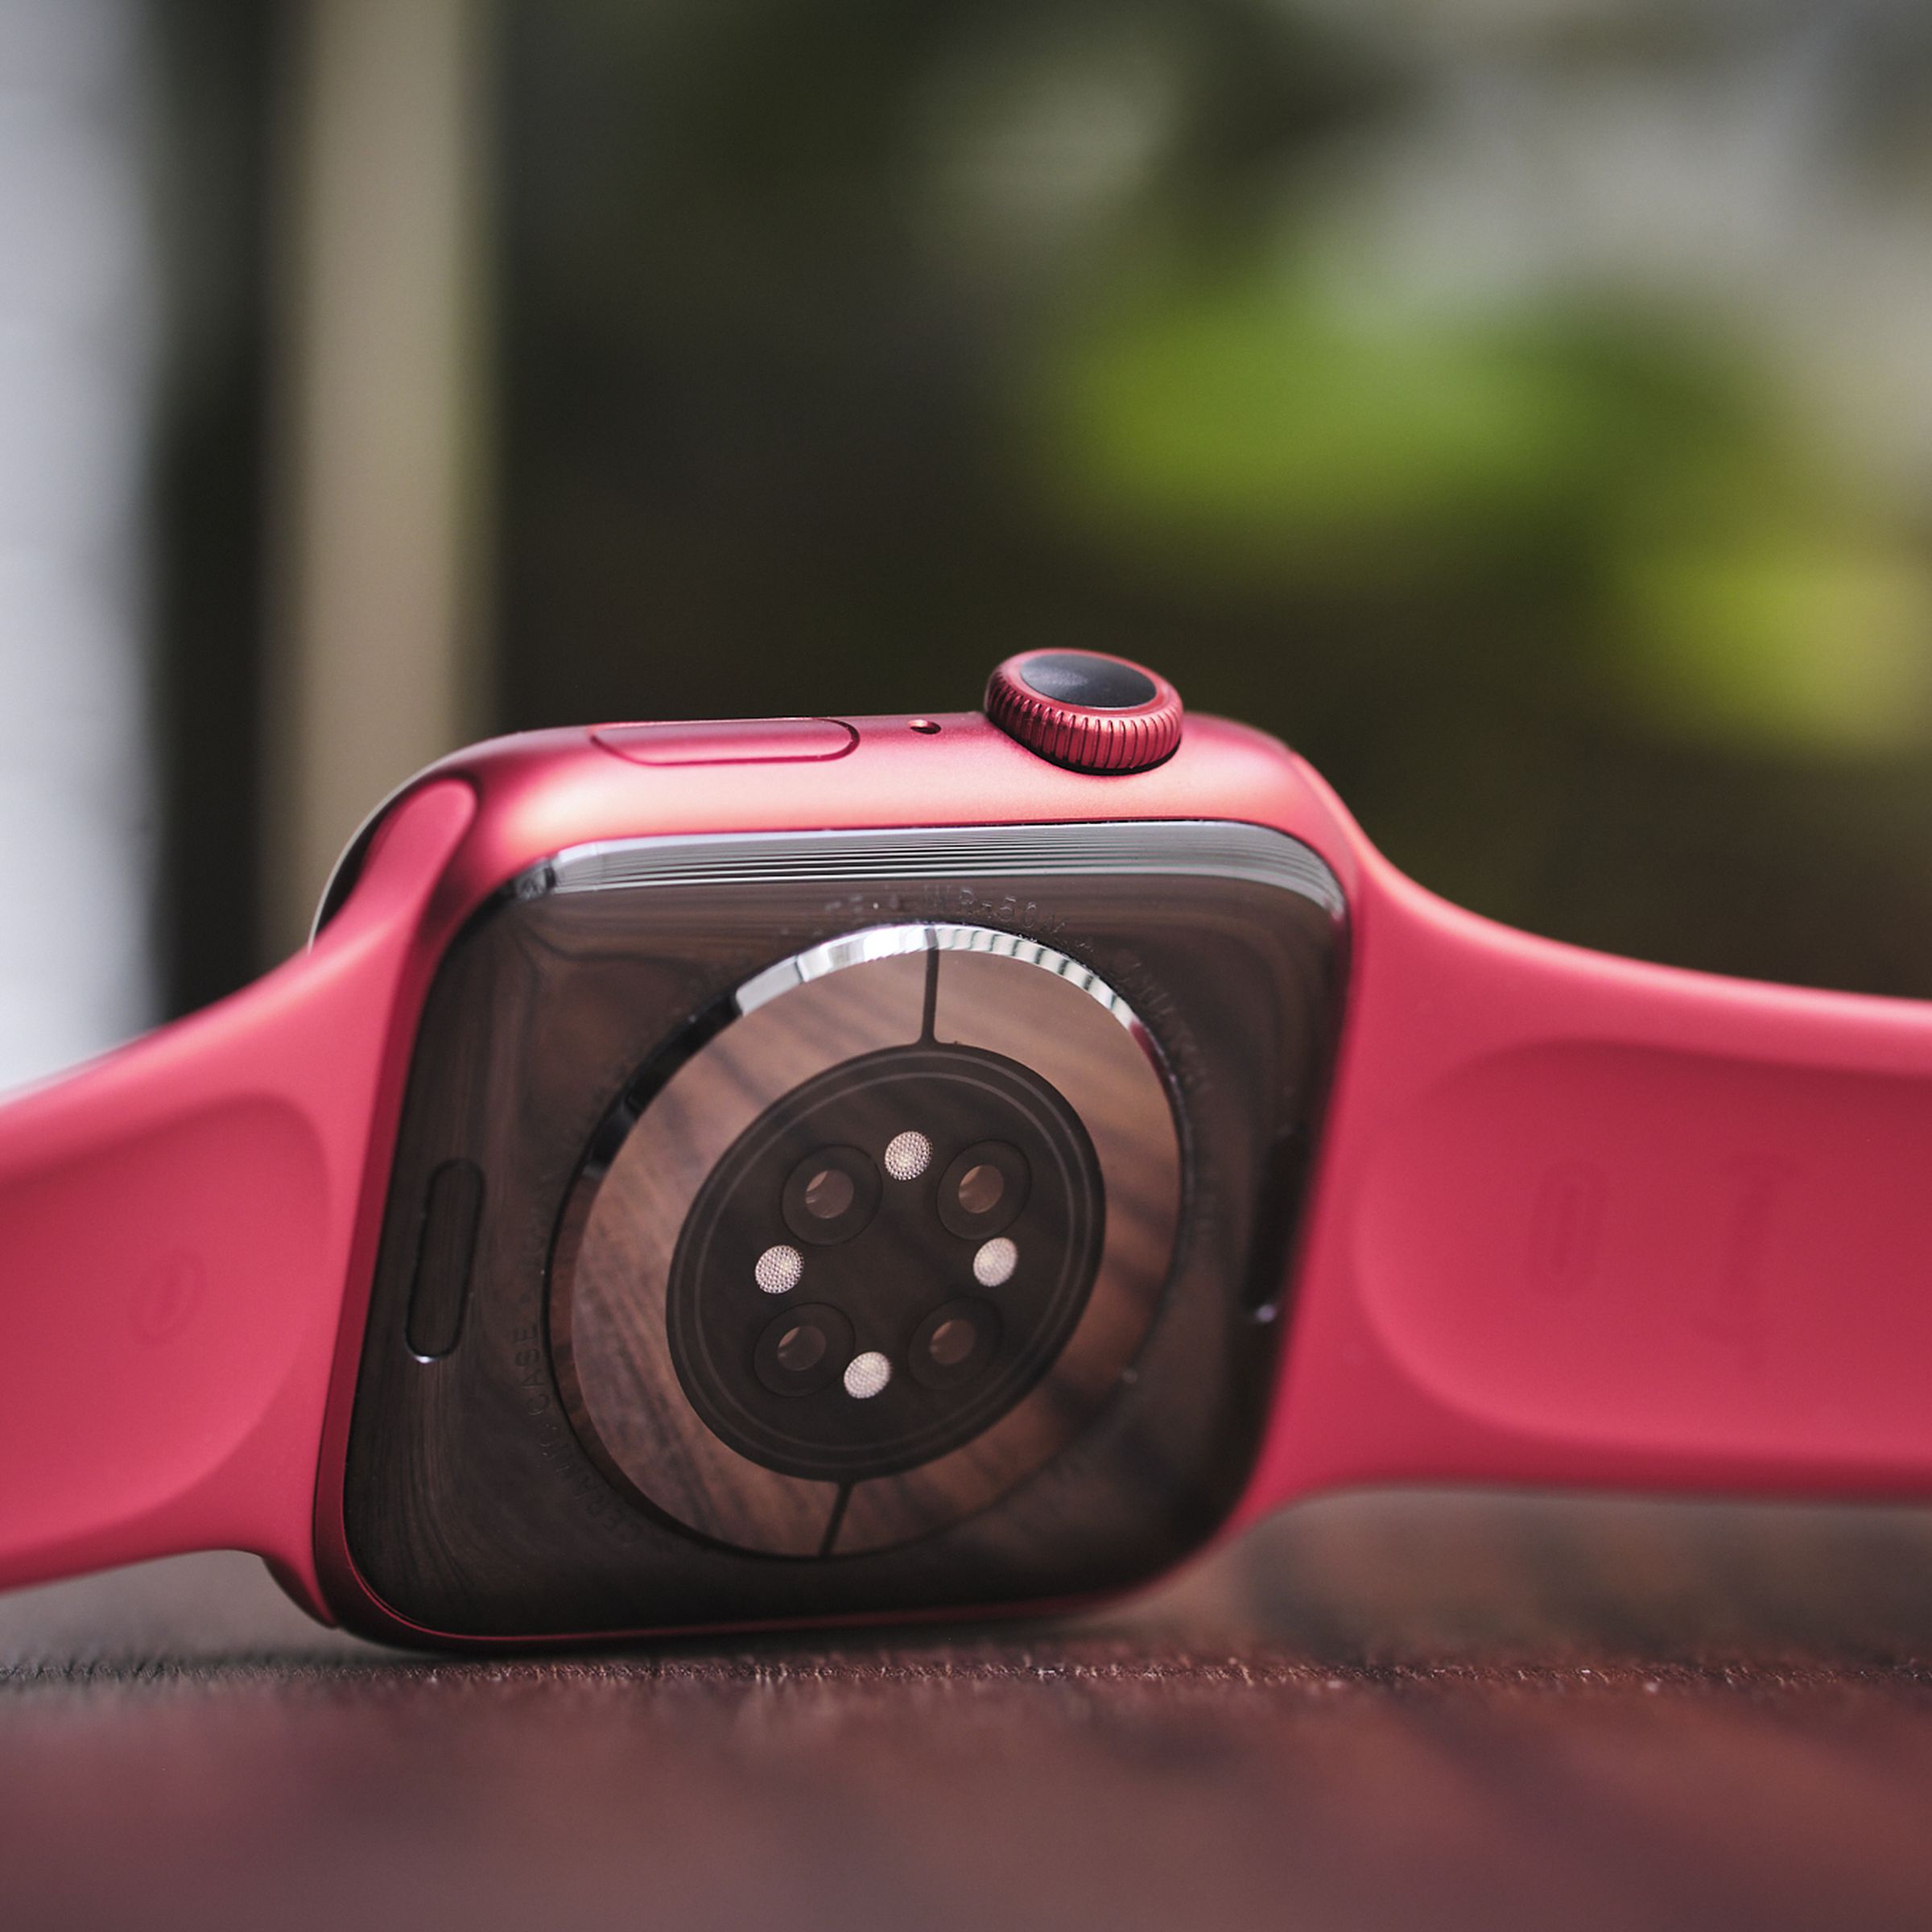 Close-up of rear side of an Apple Watch with a red sports band on a wood table, with its sensors showing